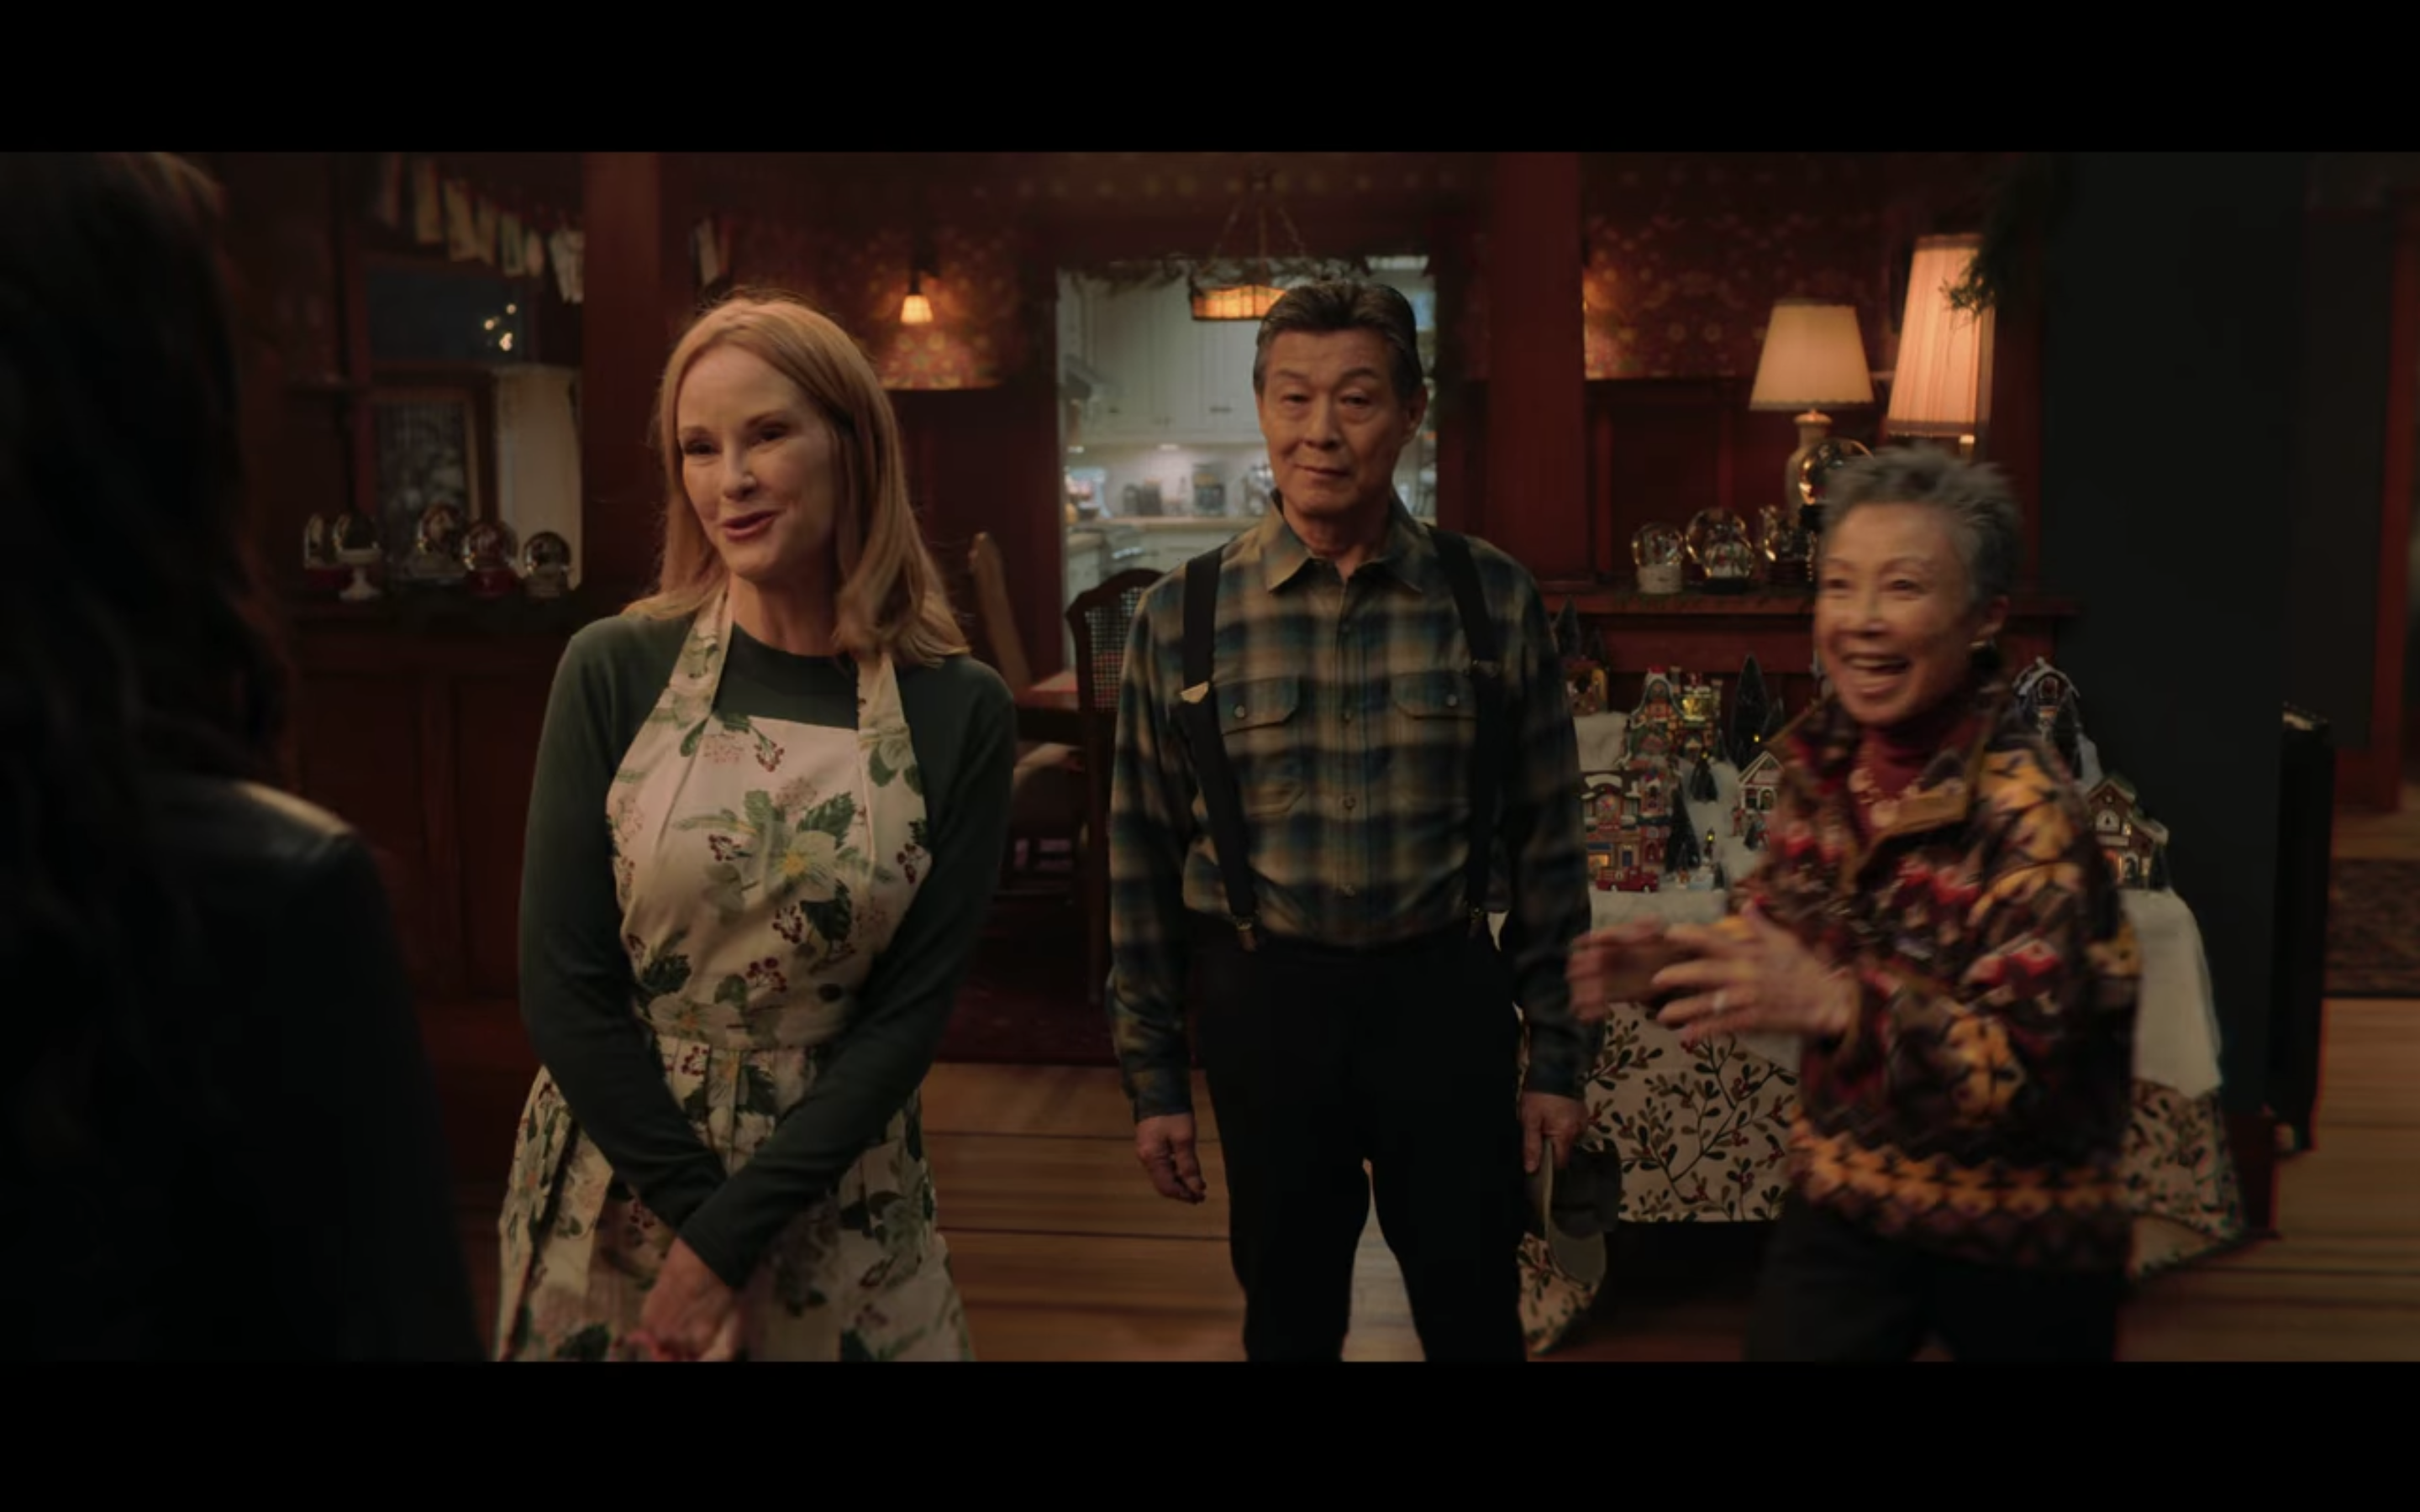 Josh's mom (a blonde white woman wearing an apron), Dad (an Asian man in a plaid shirt and suspenders), and grandmother (an older Asian woman with short grey hair and a colorful top) greeting Natalie.